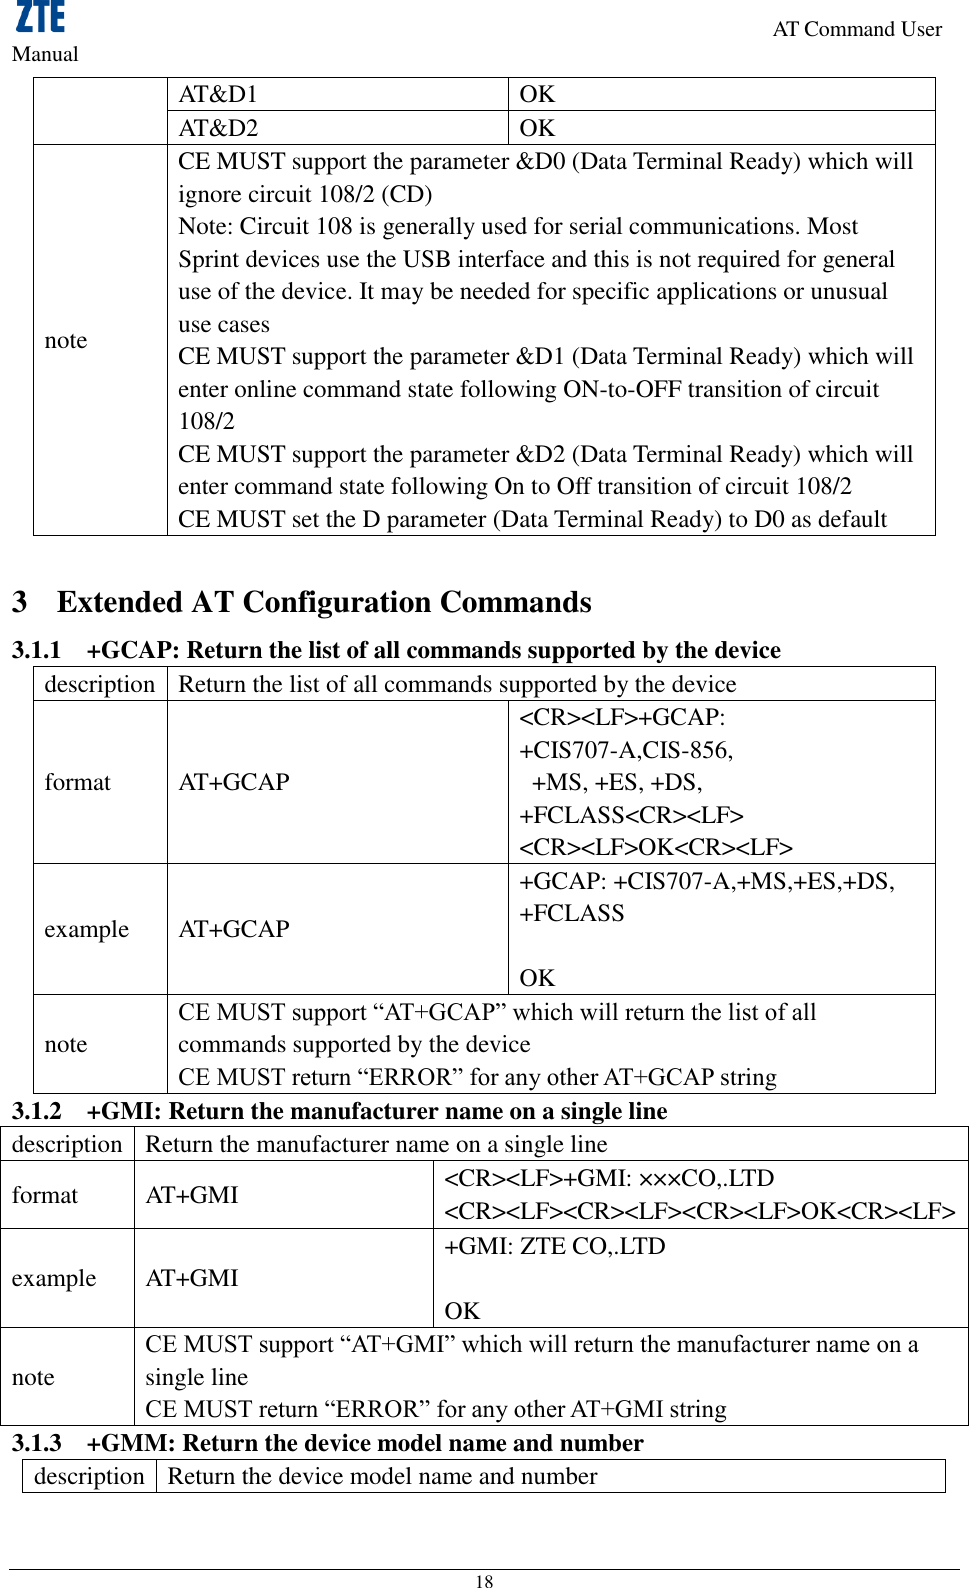                                                                     AT Command User Manual 18 AT&amp;D1 OK AT&amp;D2 OK note CE MUST support the parameter &amp;D0 (Data Terminal Ready) which will ignore circuit 108/2 (CD)   Note: Circuit 108 is generally used for serial communications. Most Sprint devices use the USB interface and this is not required for general use of the device. It may be needed for specific applications or unusual use cases CE MUST support the parameter &amp;D1 (Data Terminal Ready) which will enter online command state following ON-to-OFF transition of circuit 108/2   CE MUST support the parameter &amp;D2 (Data Terminal Ready) which will enter command state following On to Off transition of circuit 108/2   CE MUST set the D parameter (Data Terminal Ready) to D0 as default  3 Extended AT Configuration Commands 3.1.1 +GCAP: Return the list of all commands supported by the device description Return the list of all commands supported by the device format AT+GCAP &lt;CR&gt;&lt;LF&gt;+GCAP: +CIS707-A,CIS-856,   +MS, +ES, +DS, +FCLASS&lt;CR&gt;&lt;LF&gt; &lt;CR&gt;&lt;LF&gt;OK&lt;CR&gt;&lt;LF&gt; example AT+GCAP +GCAP: +CIS707-A,+MS,+ES,+DS, +FCLASS  OK note CE MUST support “AT+GCAP” which will return the list of all commands supported by the device   CE MUST return “ERROR” for any other AT+GCAP string 3.1.2 +GMI: Return the manufacturer name on a single line description Return the manufacturer name on a single line format AT+GMI &lt;CR&gt;&lt;LF&gt;+GMI: ×××CO,.LTD &lt;CR&gt;&lt;LF&gt;&lt;CR&gt;&lt;LF&gt;&lt;CR&gt;&lt;LF&gt;OK&lt;CR&gt;&lt;LF&gt; example AT+GMI +GMI: ZTE CO,.LTD  OK note CE MUST support “AT+GMI” which will return the manufacturer name on a single line   CE MUST return “ERROR” for any other AT+GMI string 3.1.3 +GMM: Return the device model name and number description Return the device model name and number 